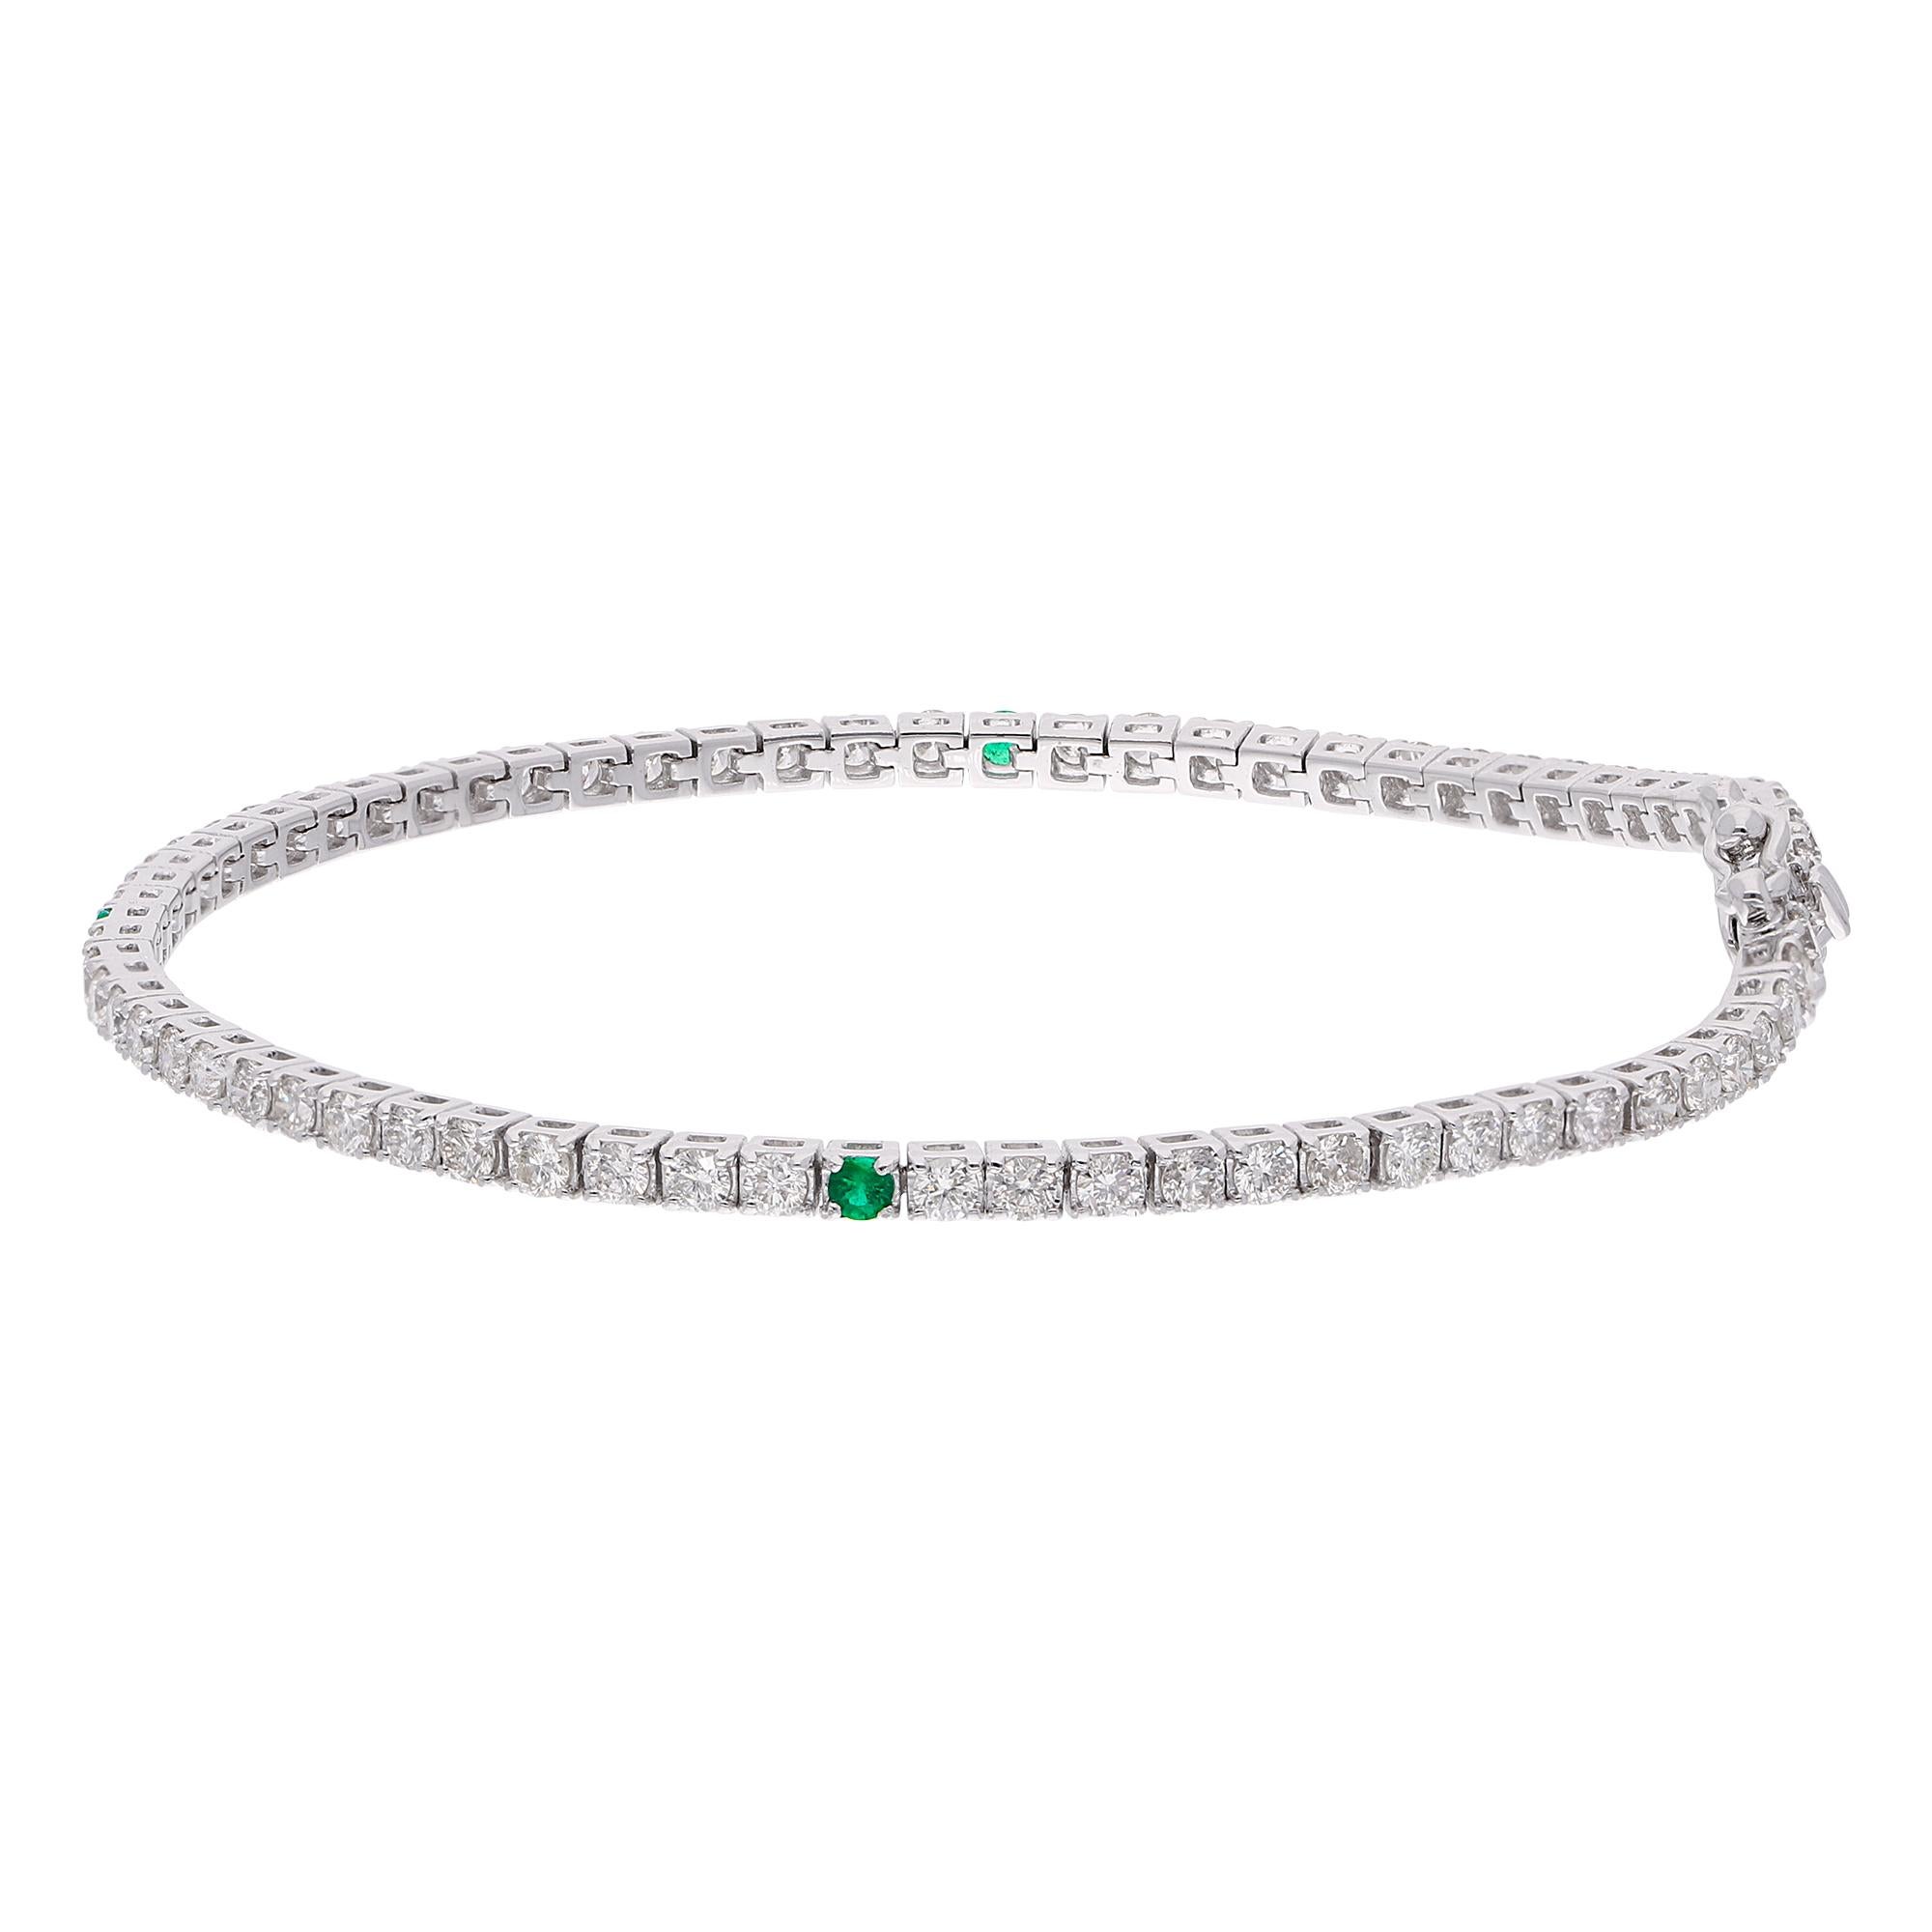 Make a statement of timeless elegance with this stunning Emerald Diamond Tennis Bracelet from our collection. The green hue of the emeralds is beautifully contrasted by the brilliance of the diamonds, creating a striking display of color and light.